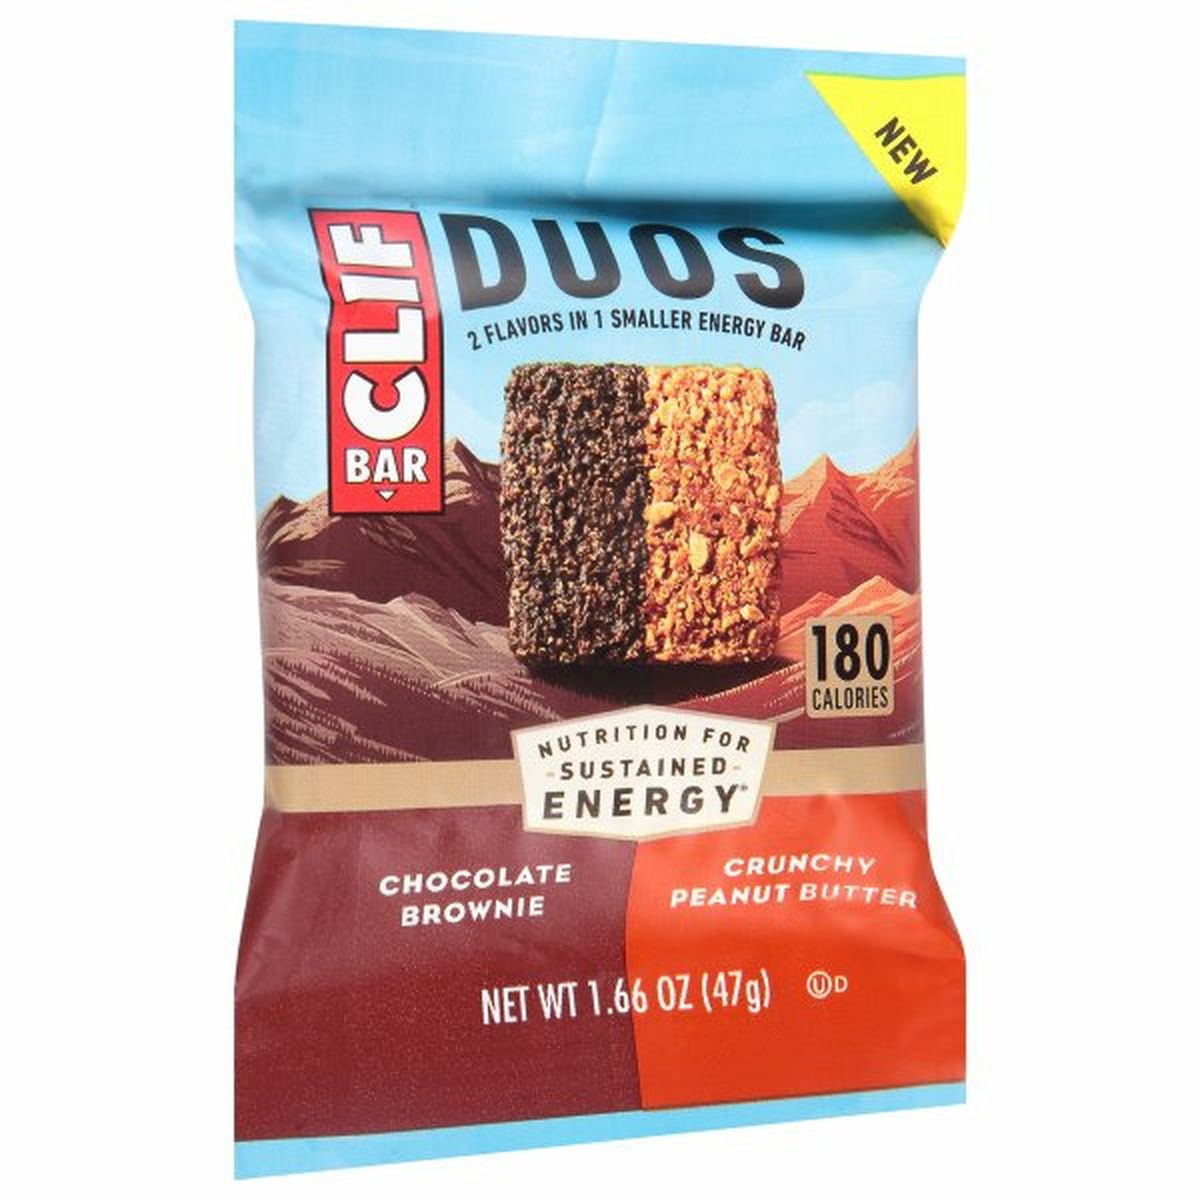 Calories in CLIF BAR Duos Energy Bar, Chocolate Brownie/Crunchy Peanut Butter